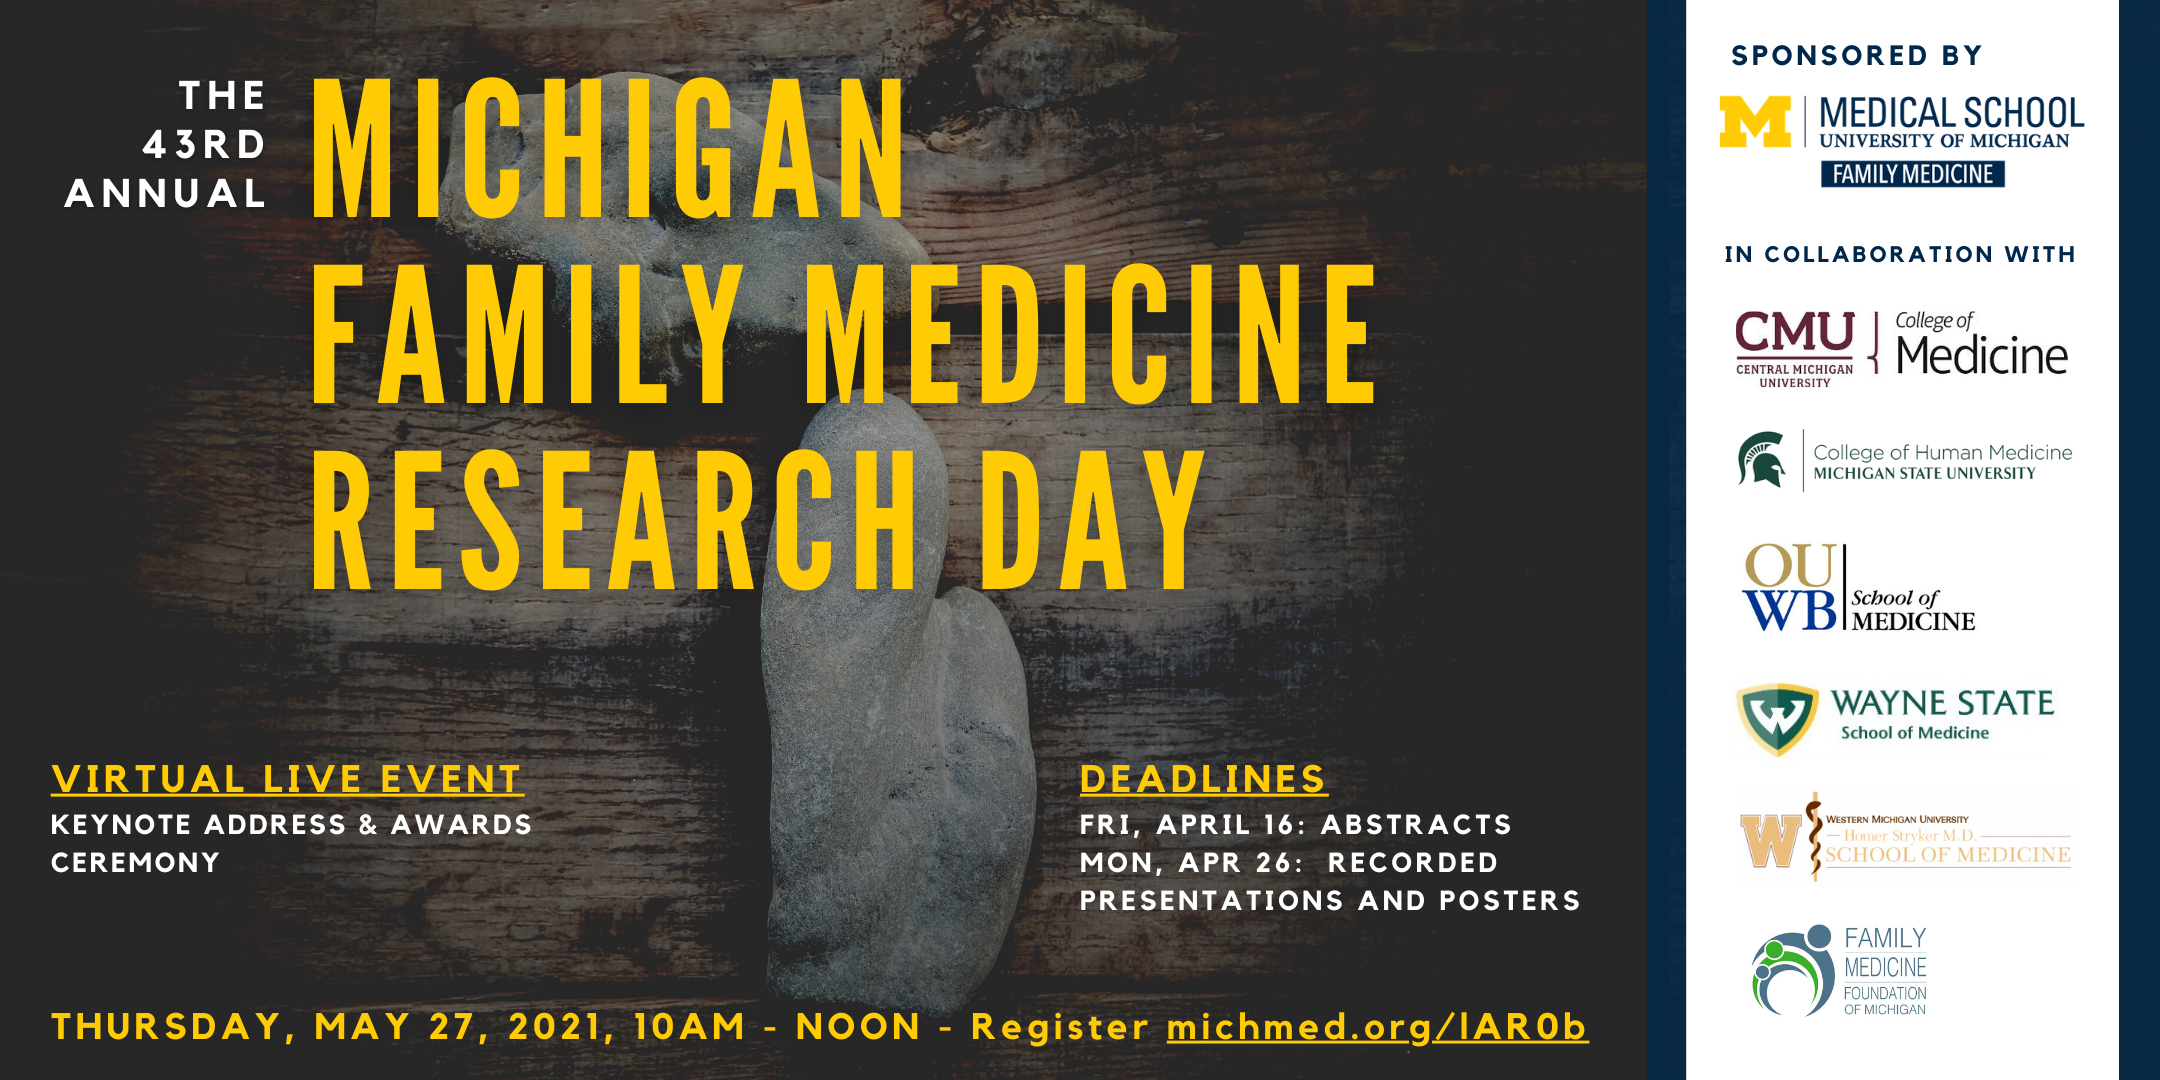 The 43rd Annual Virtual Michigan Family Medicine Research Day Sponsored by the University of Michigan Medical School Department of Family Medicine, in collaboration with CMU, MSU, Oakland University, Wayne State, WMU, Family Medicine Foundation of Michiga